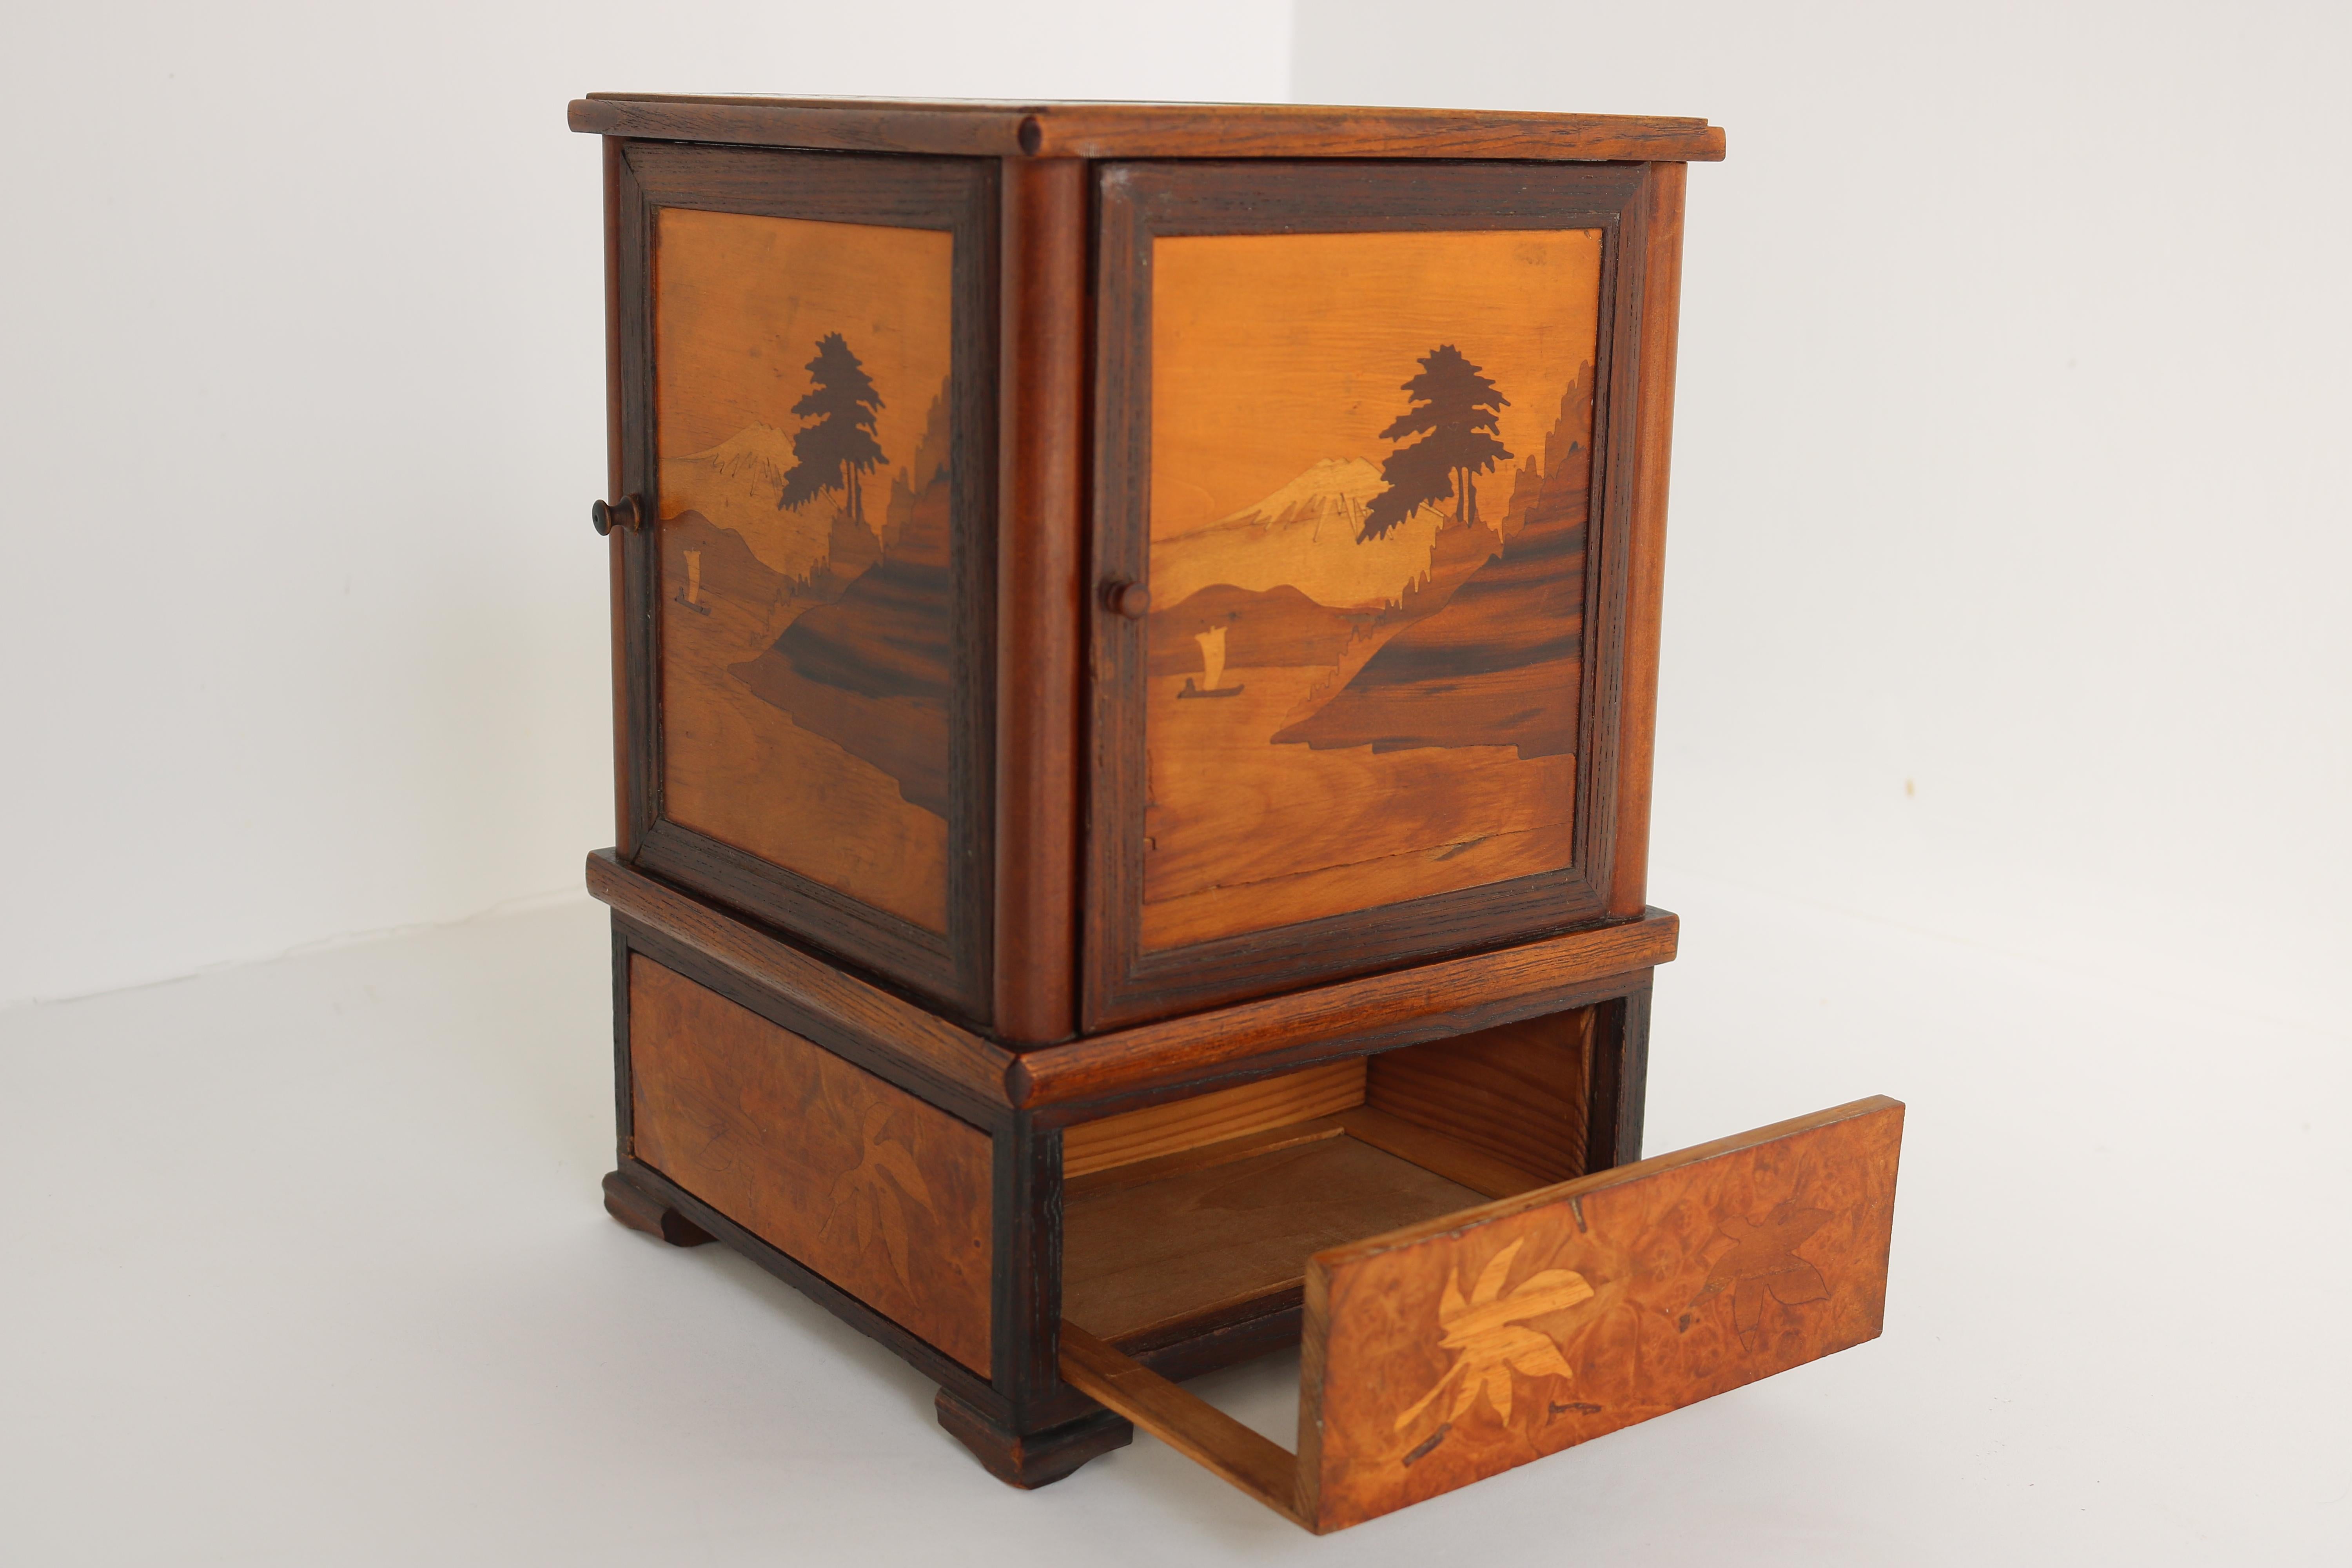 Early 20th Century Antique French Inlaid Marquetry Cigar Box 1900 Cigarette Cabinet Desk Decoration For Sale